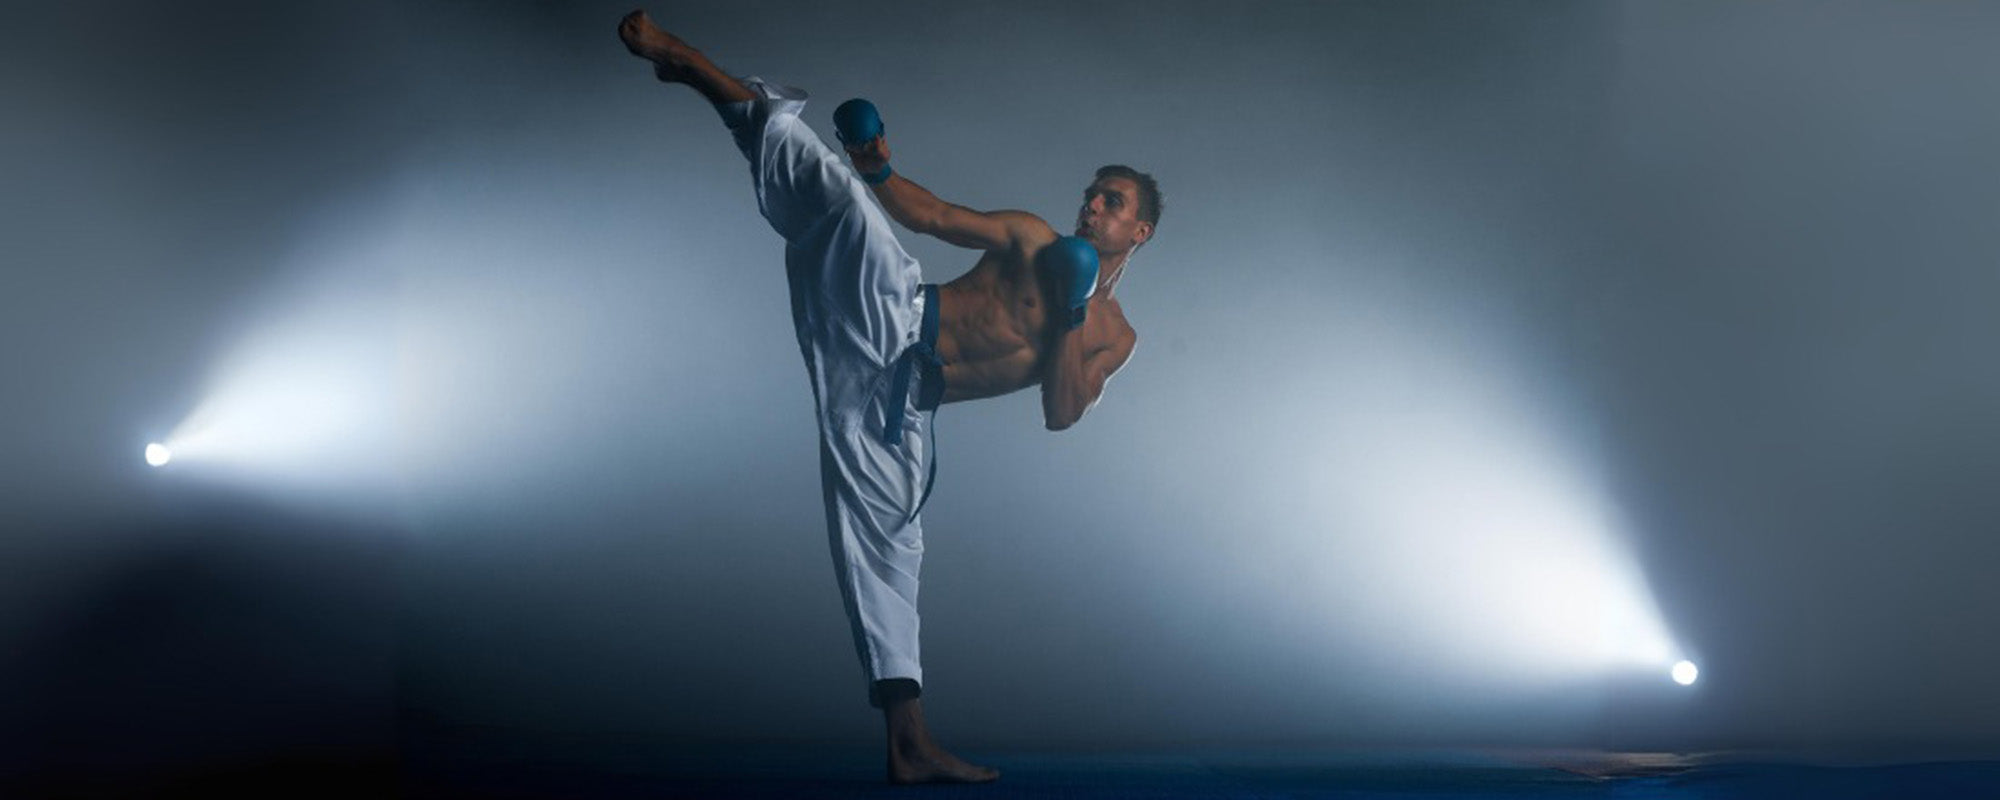 How to Stay Consistent With Your Martial Arts Training During the Holidays